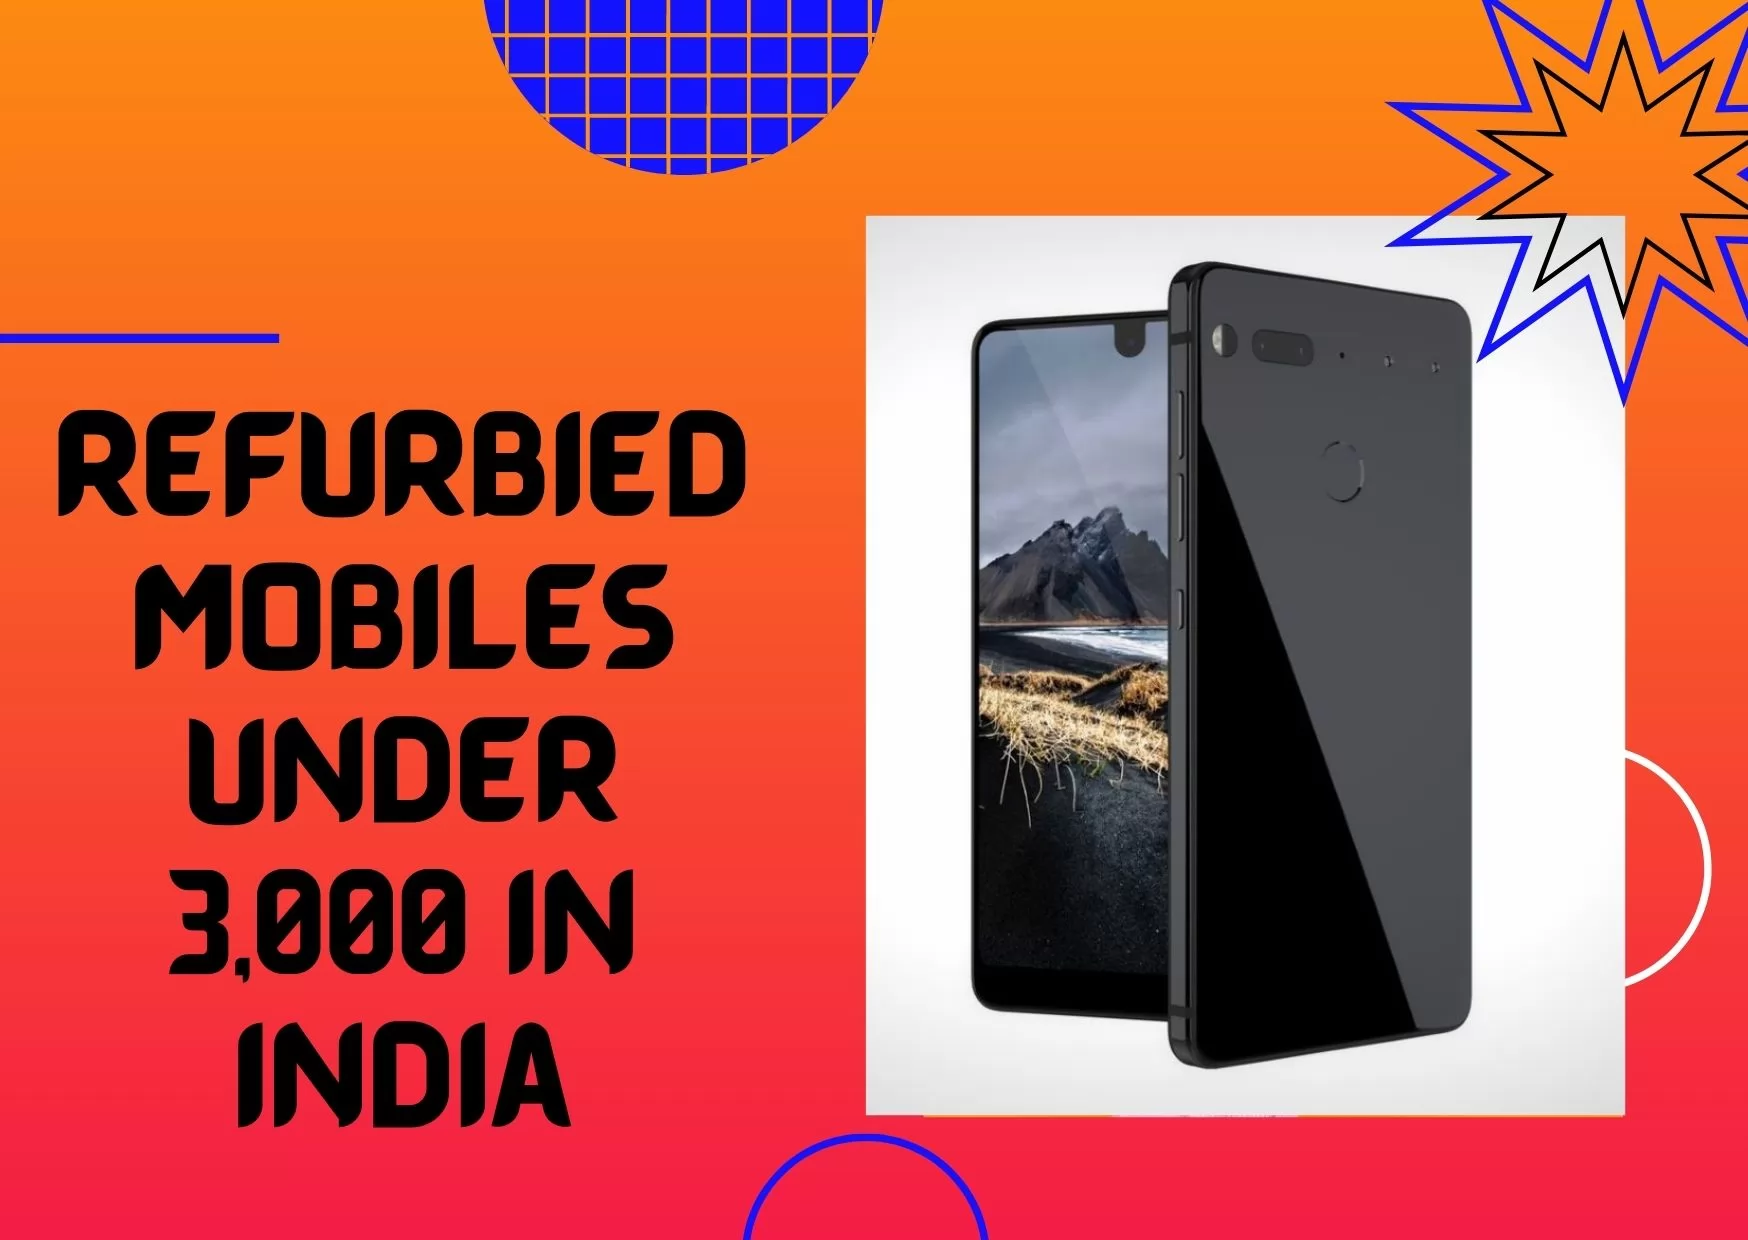 Refurbished Mobiles Under 3,000 In India